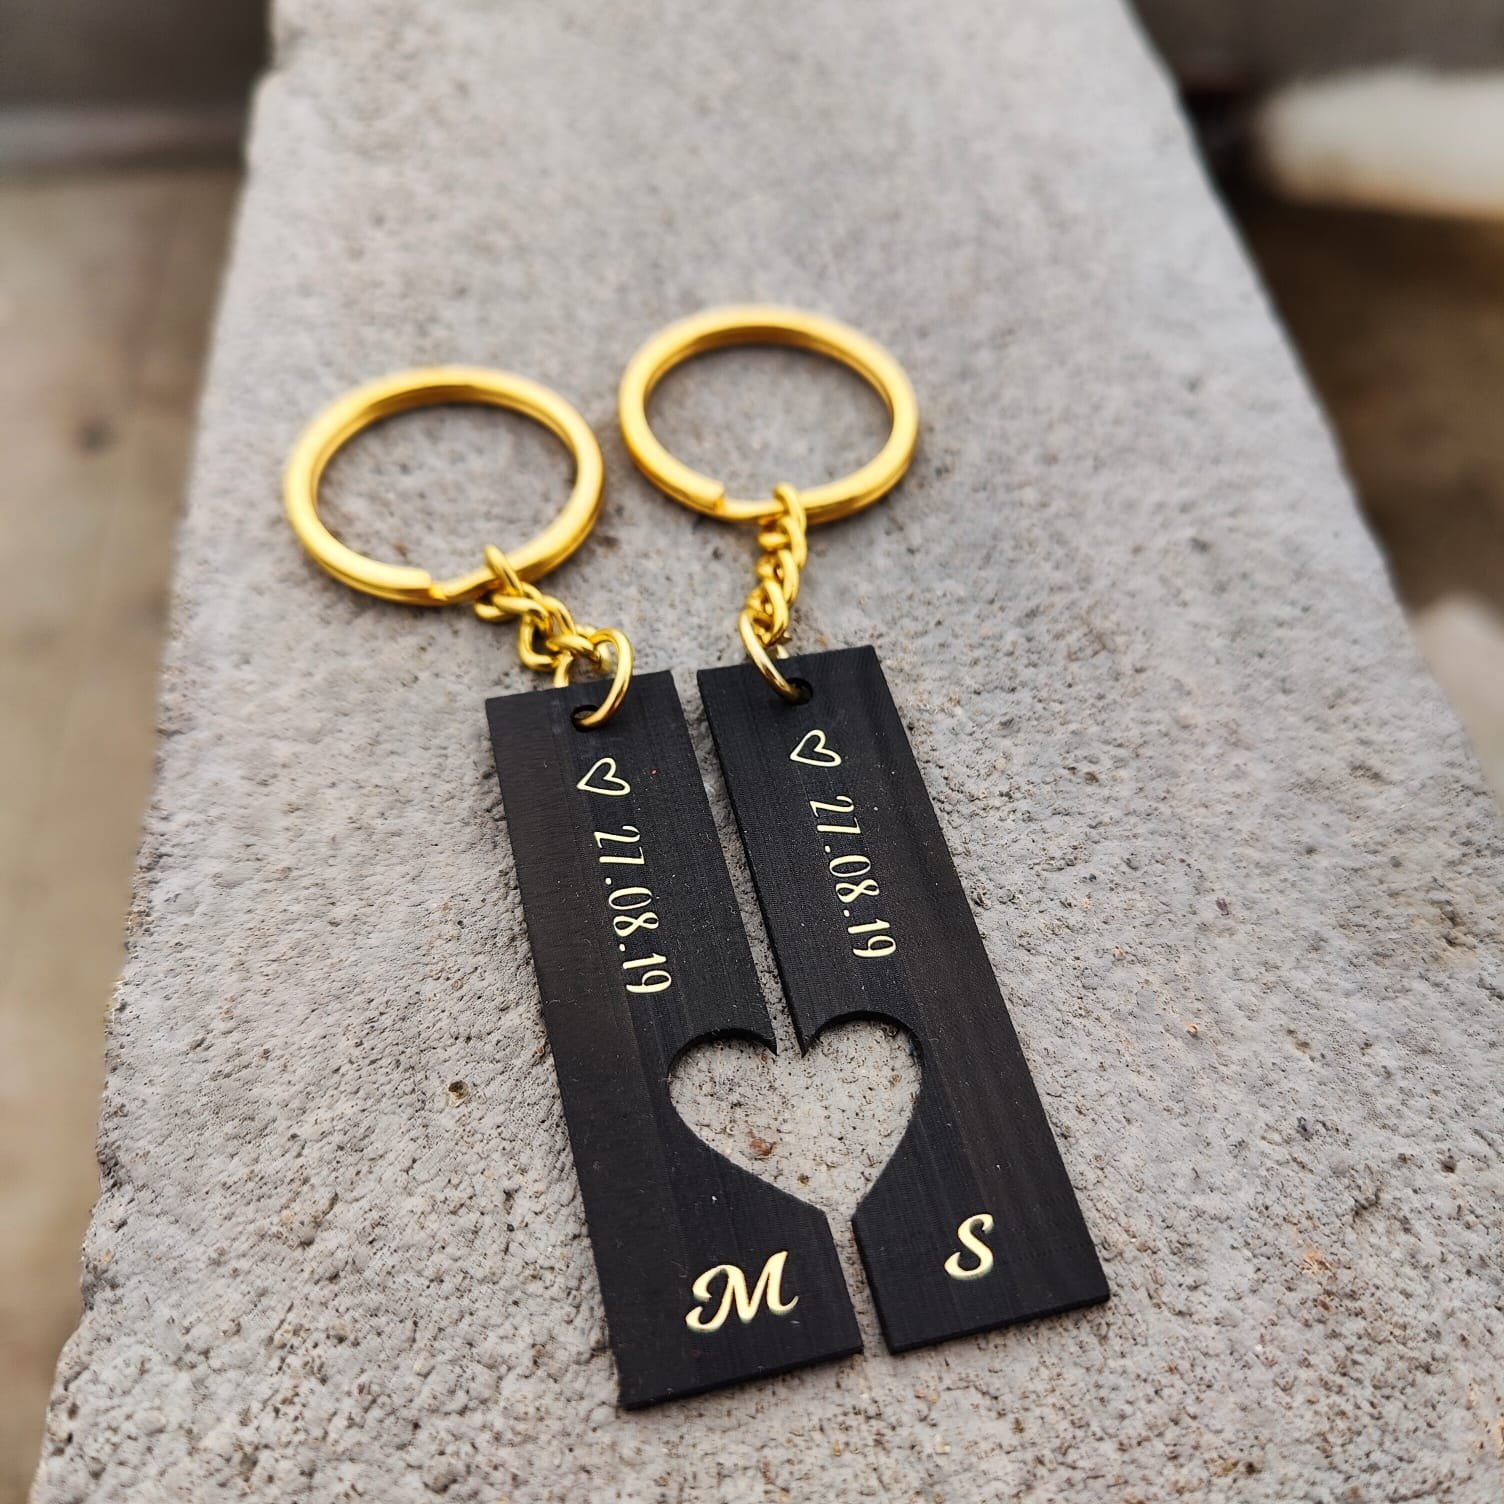 https://vivagifts.in/wp-content/uploads/2023/01/Valentines-Day-Gift-For-Love-Couple-Keychain-Valentine-Day-Gift-For-Him-Valentine-Gift-For-Her-1.jpeg